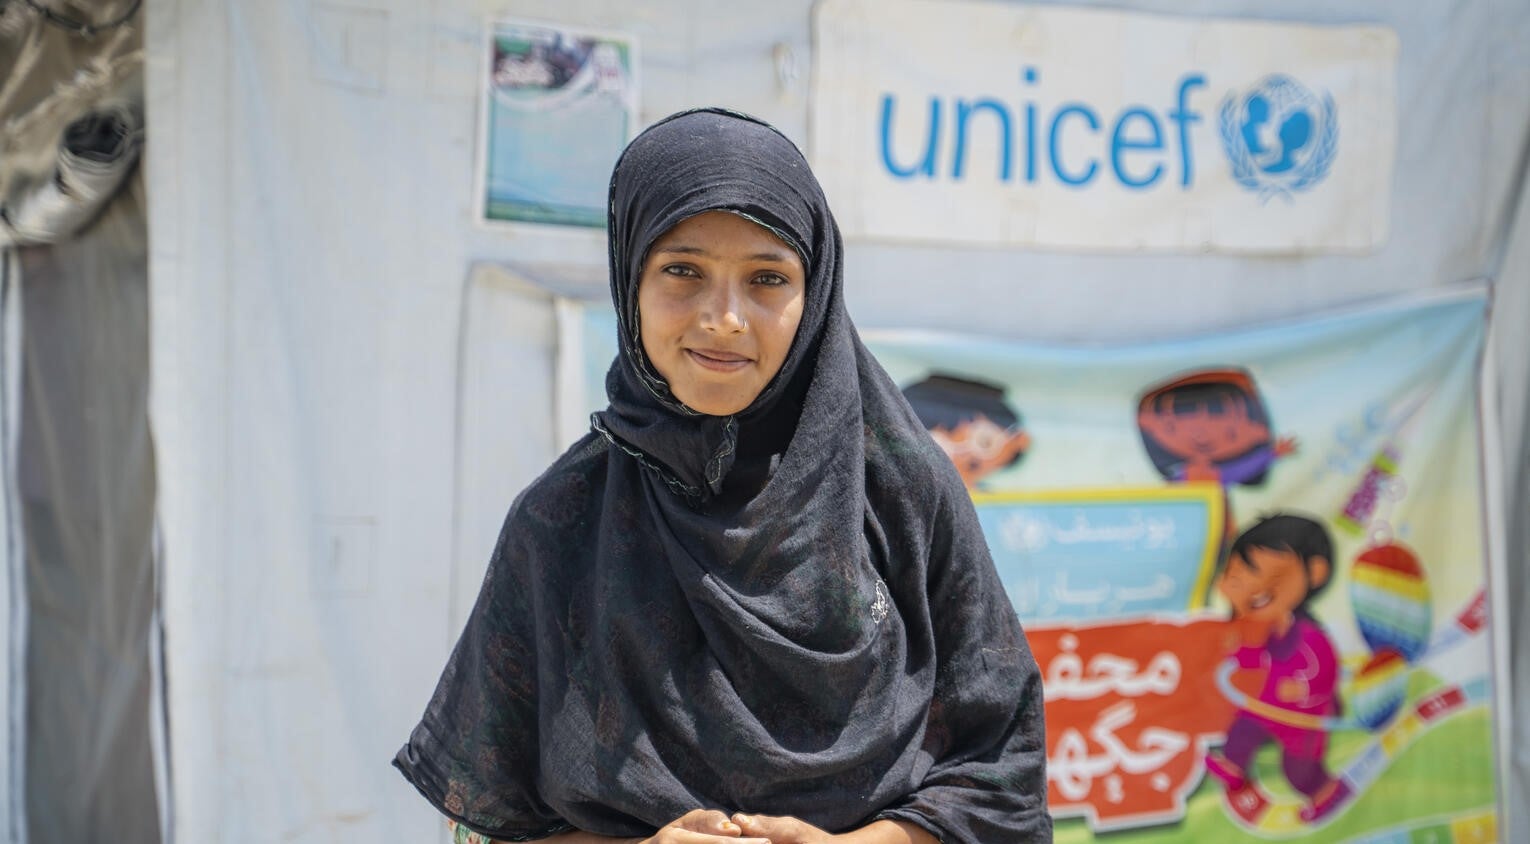 A young girl standing in front of a UNICEF tent in Pakistan